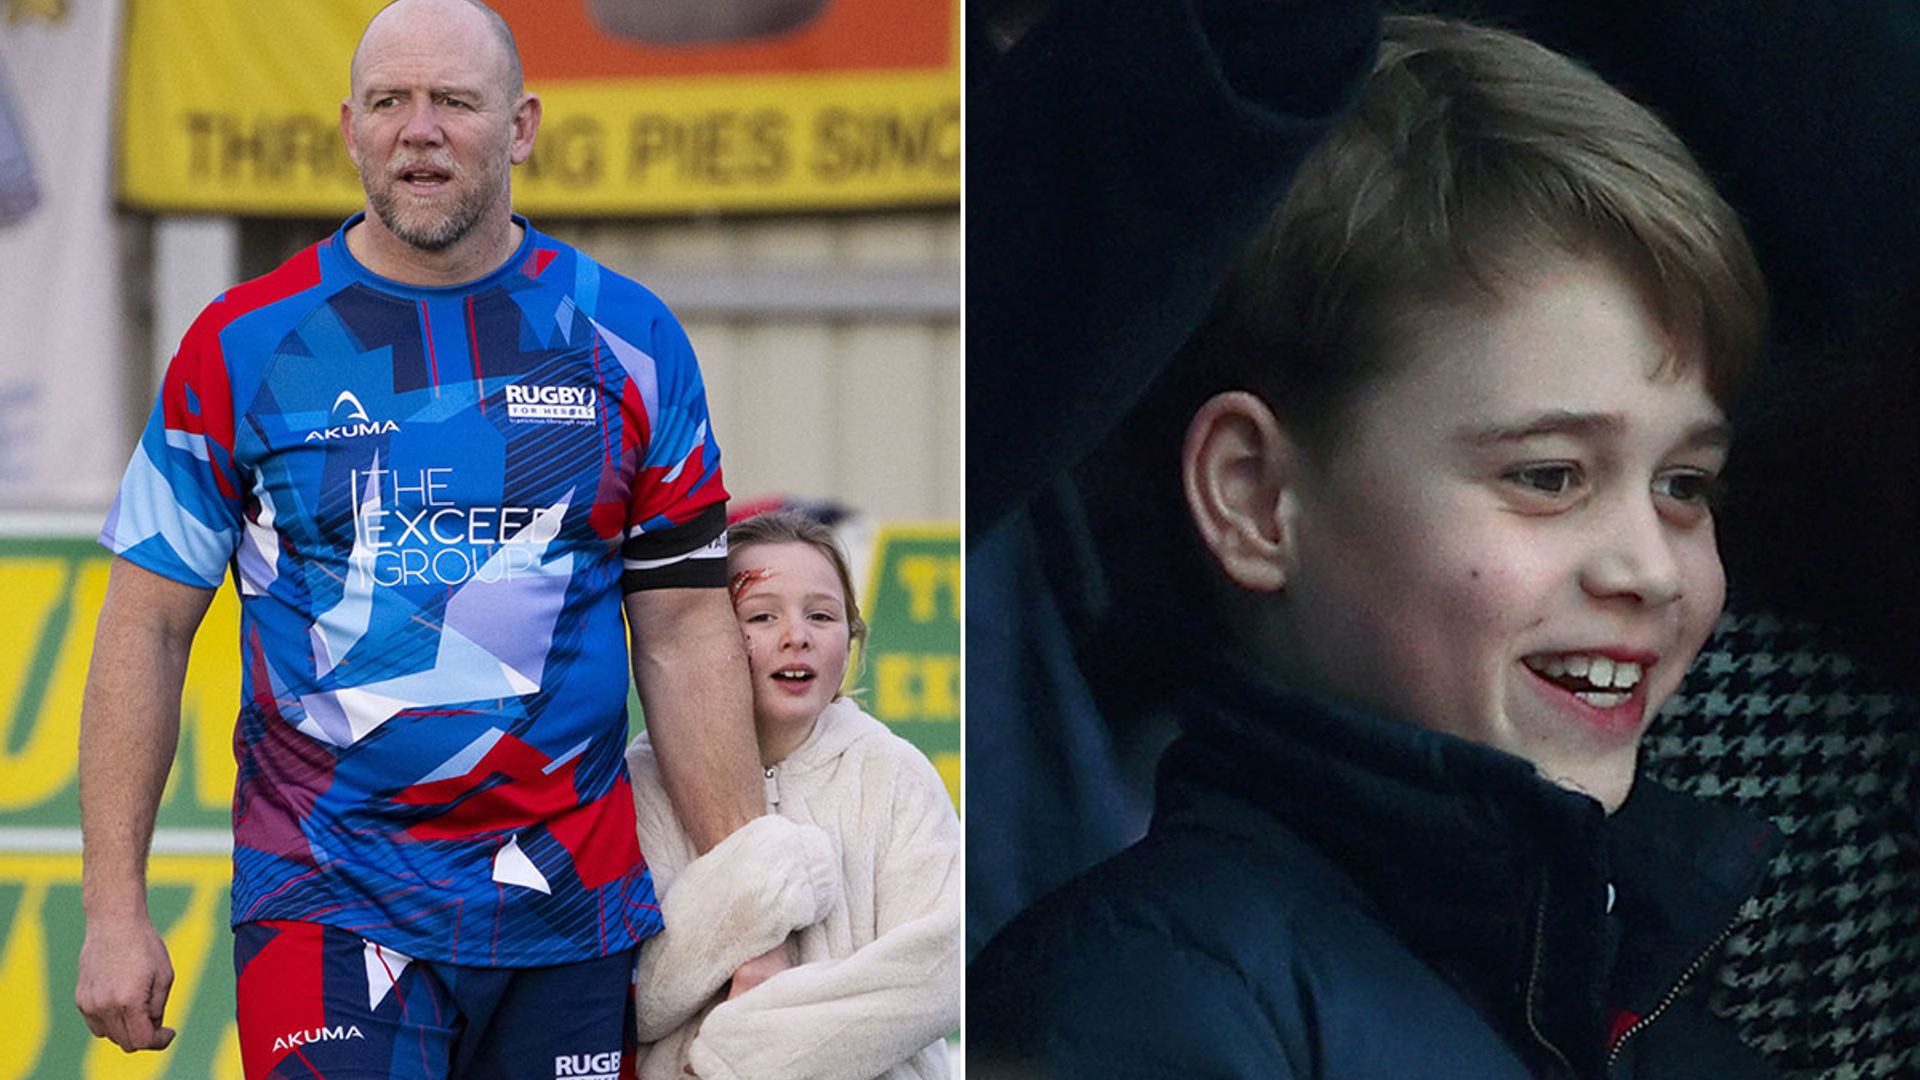 mia tindall rugby